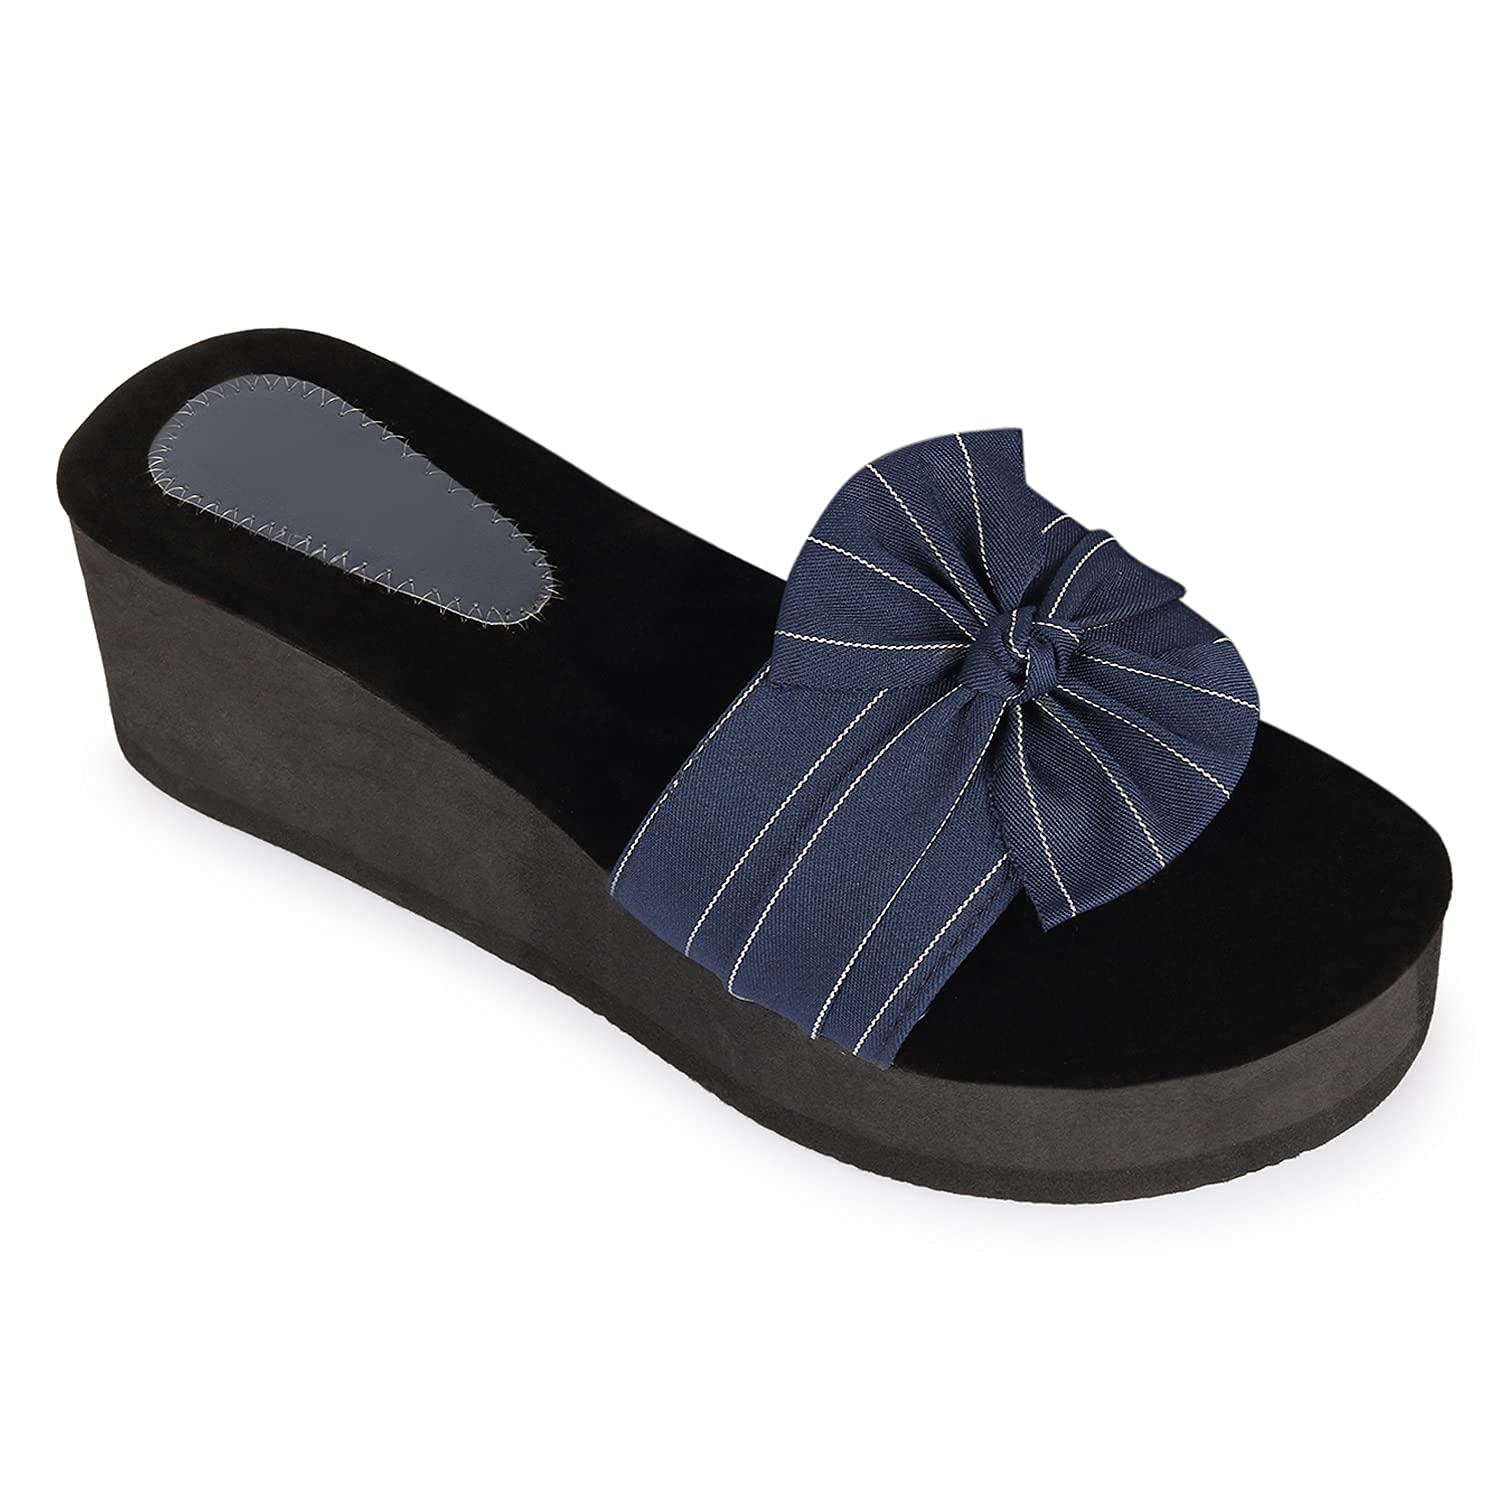 ZAPATOZ Women Wedge Heel Sandal -  Fashion Sandals in Sri Lanka from Arcade Online Shopping - Just Rs. 5099!